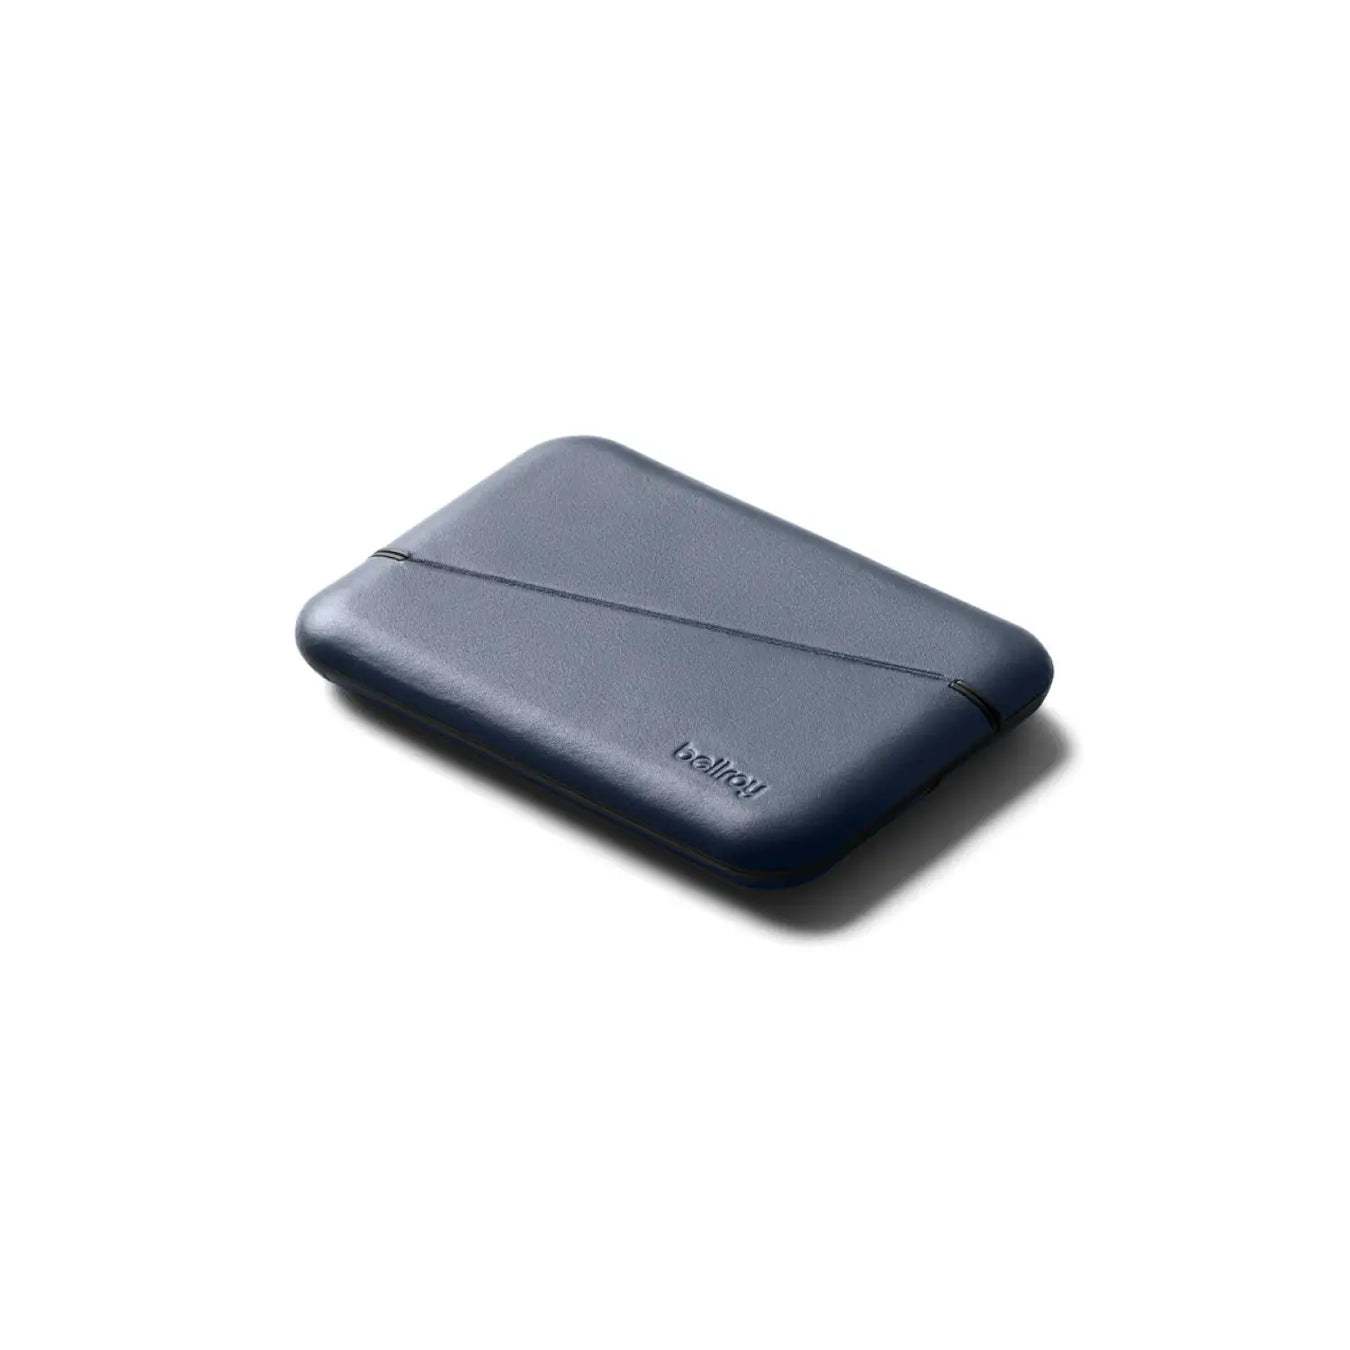 Bellroy's Business Card Holders